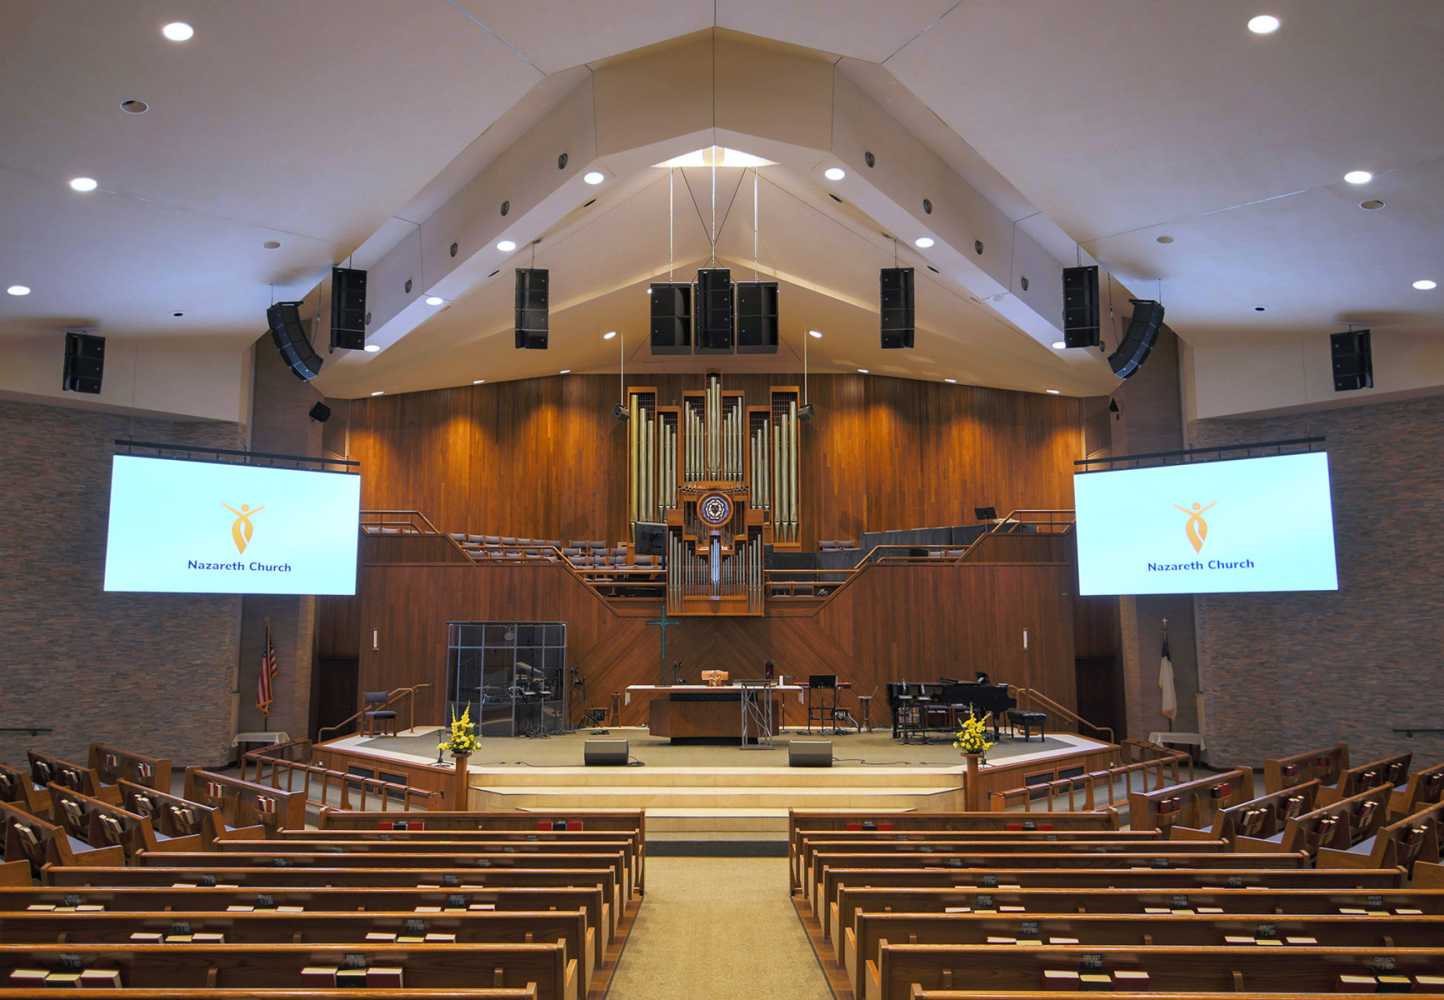 Nazareth Lutheran Church has undergone various changes over its past 150 years